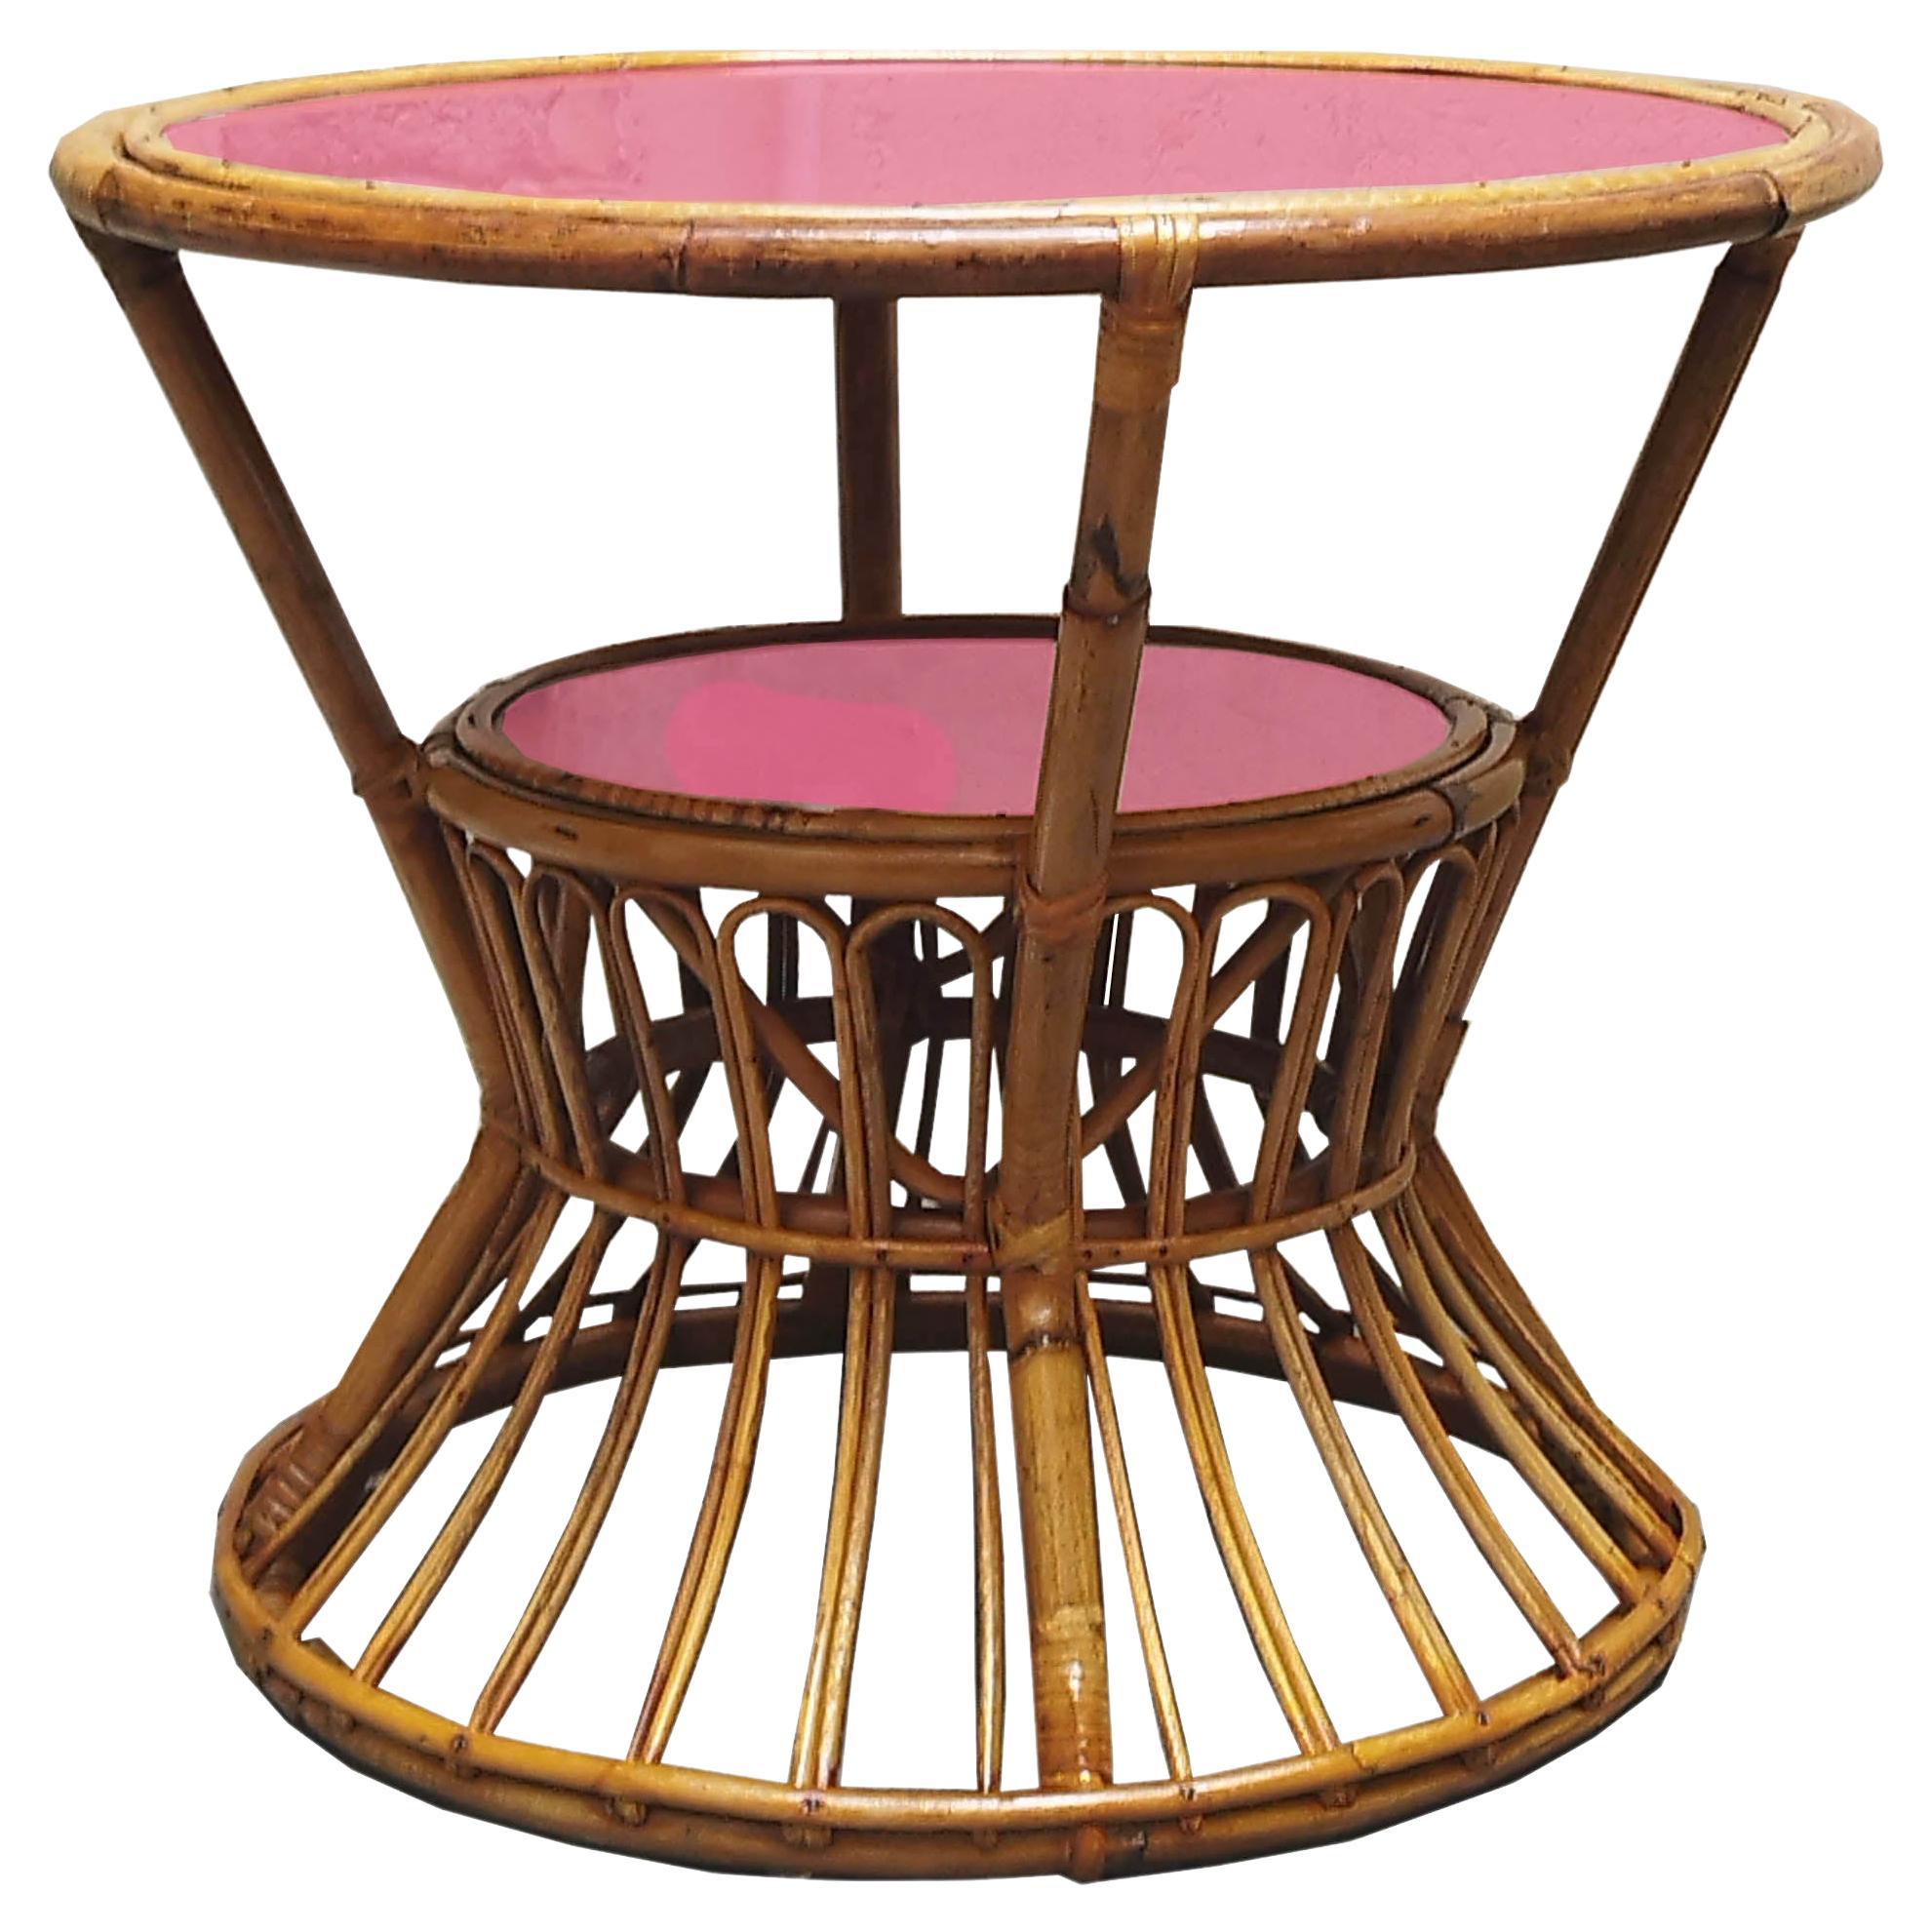 Tito Agnoli Rattan, Bamboo and Glass Coffee Table, Italy, 1960s For Sale